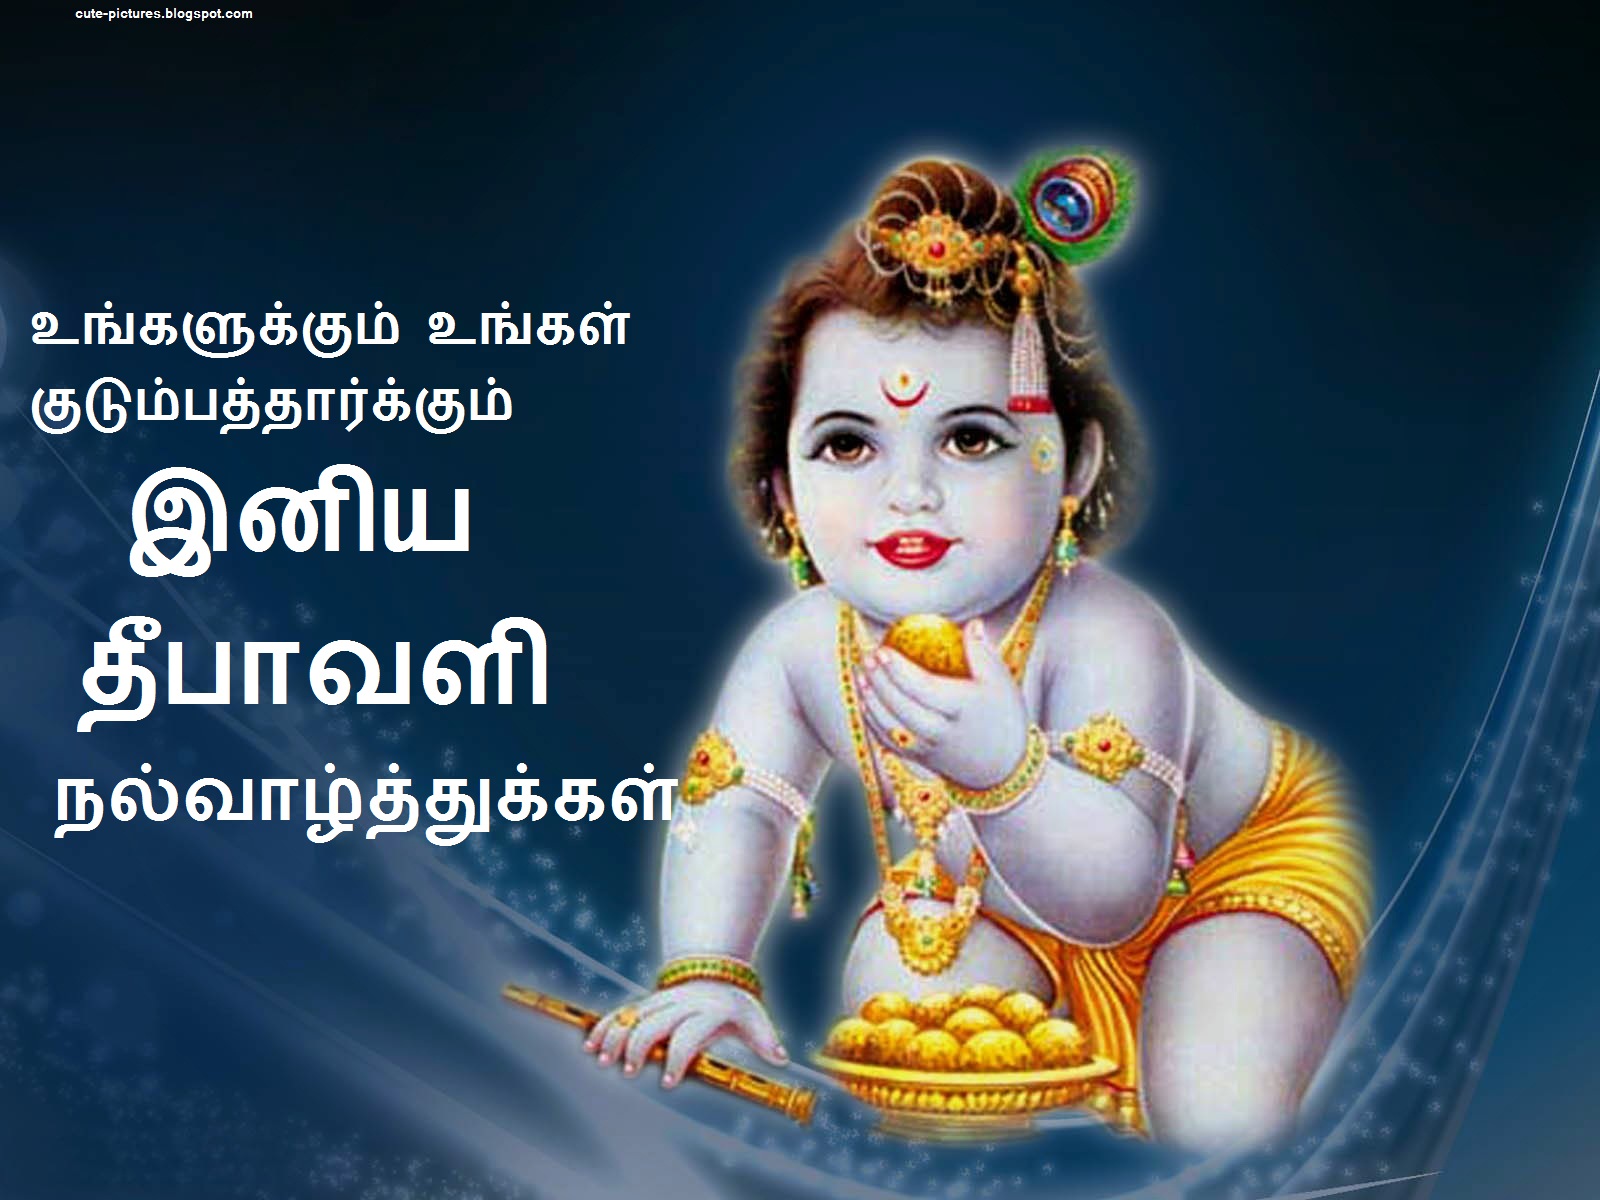 CUTE PICTURES: God with Diwali Tamil Wishes Pictures Free Download || Happy  Diwali 2020 Wallpapers Download || Diwali Festival Tamil Greetings